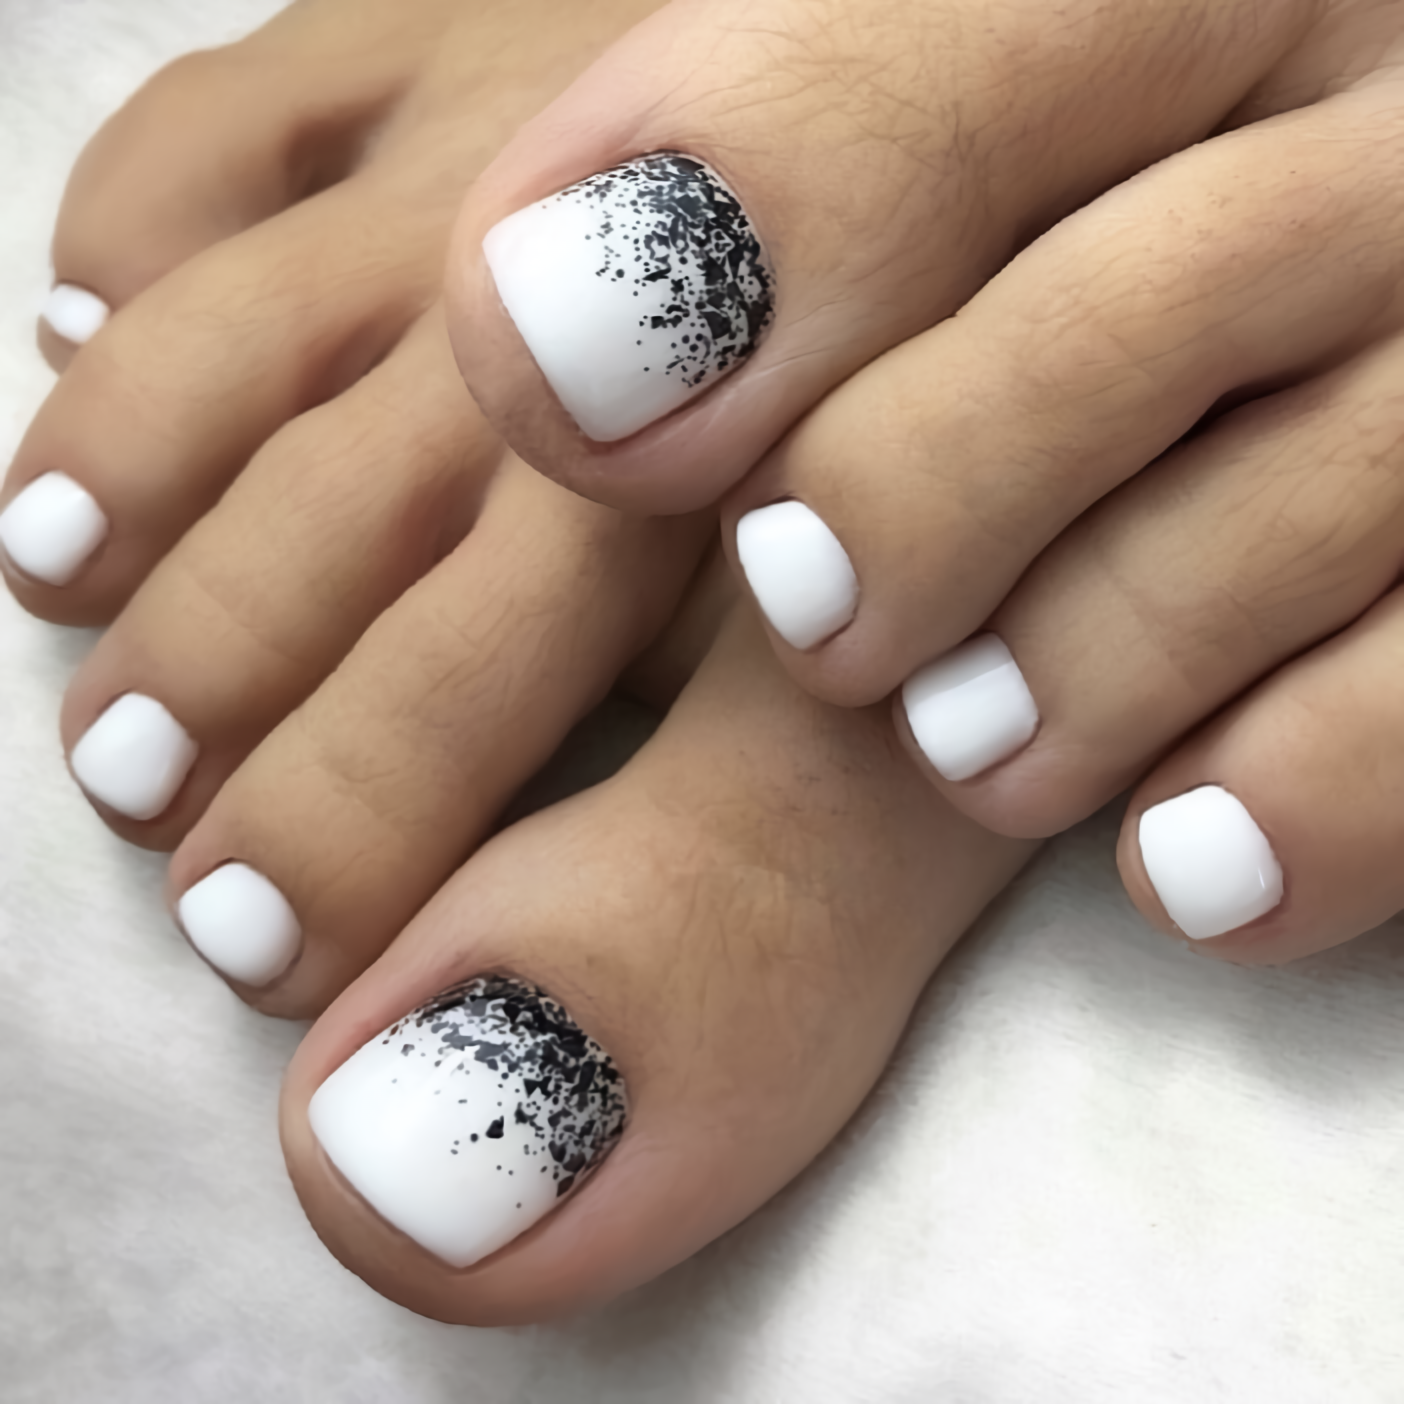 3D Toe Nails Decals For Pedicure, Multi Color Diamond False Nail Polish,  DIY Removable Fashion Lady Nail Art Tips For Foot /Pack From Emmaseasea,  $1.63 | DHgate.Com